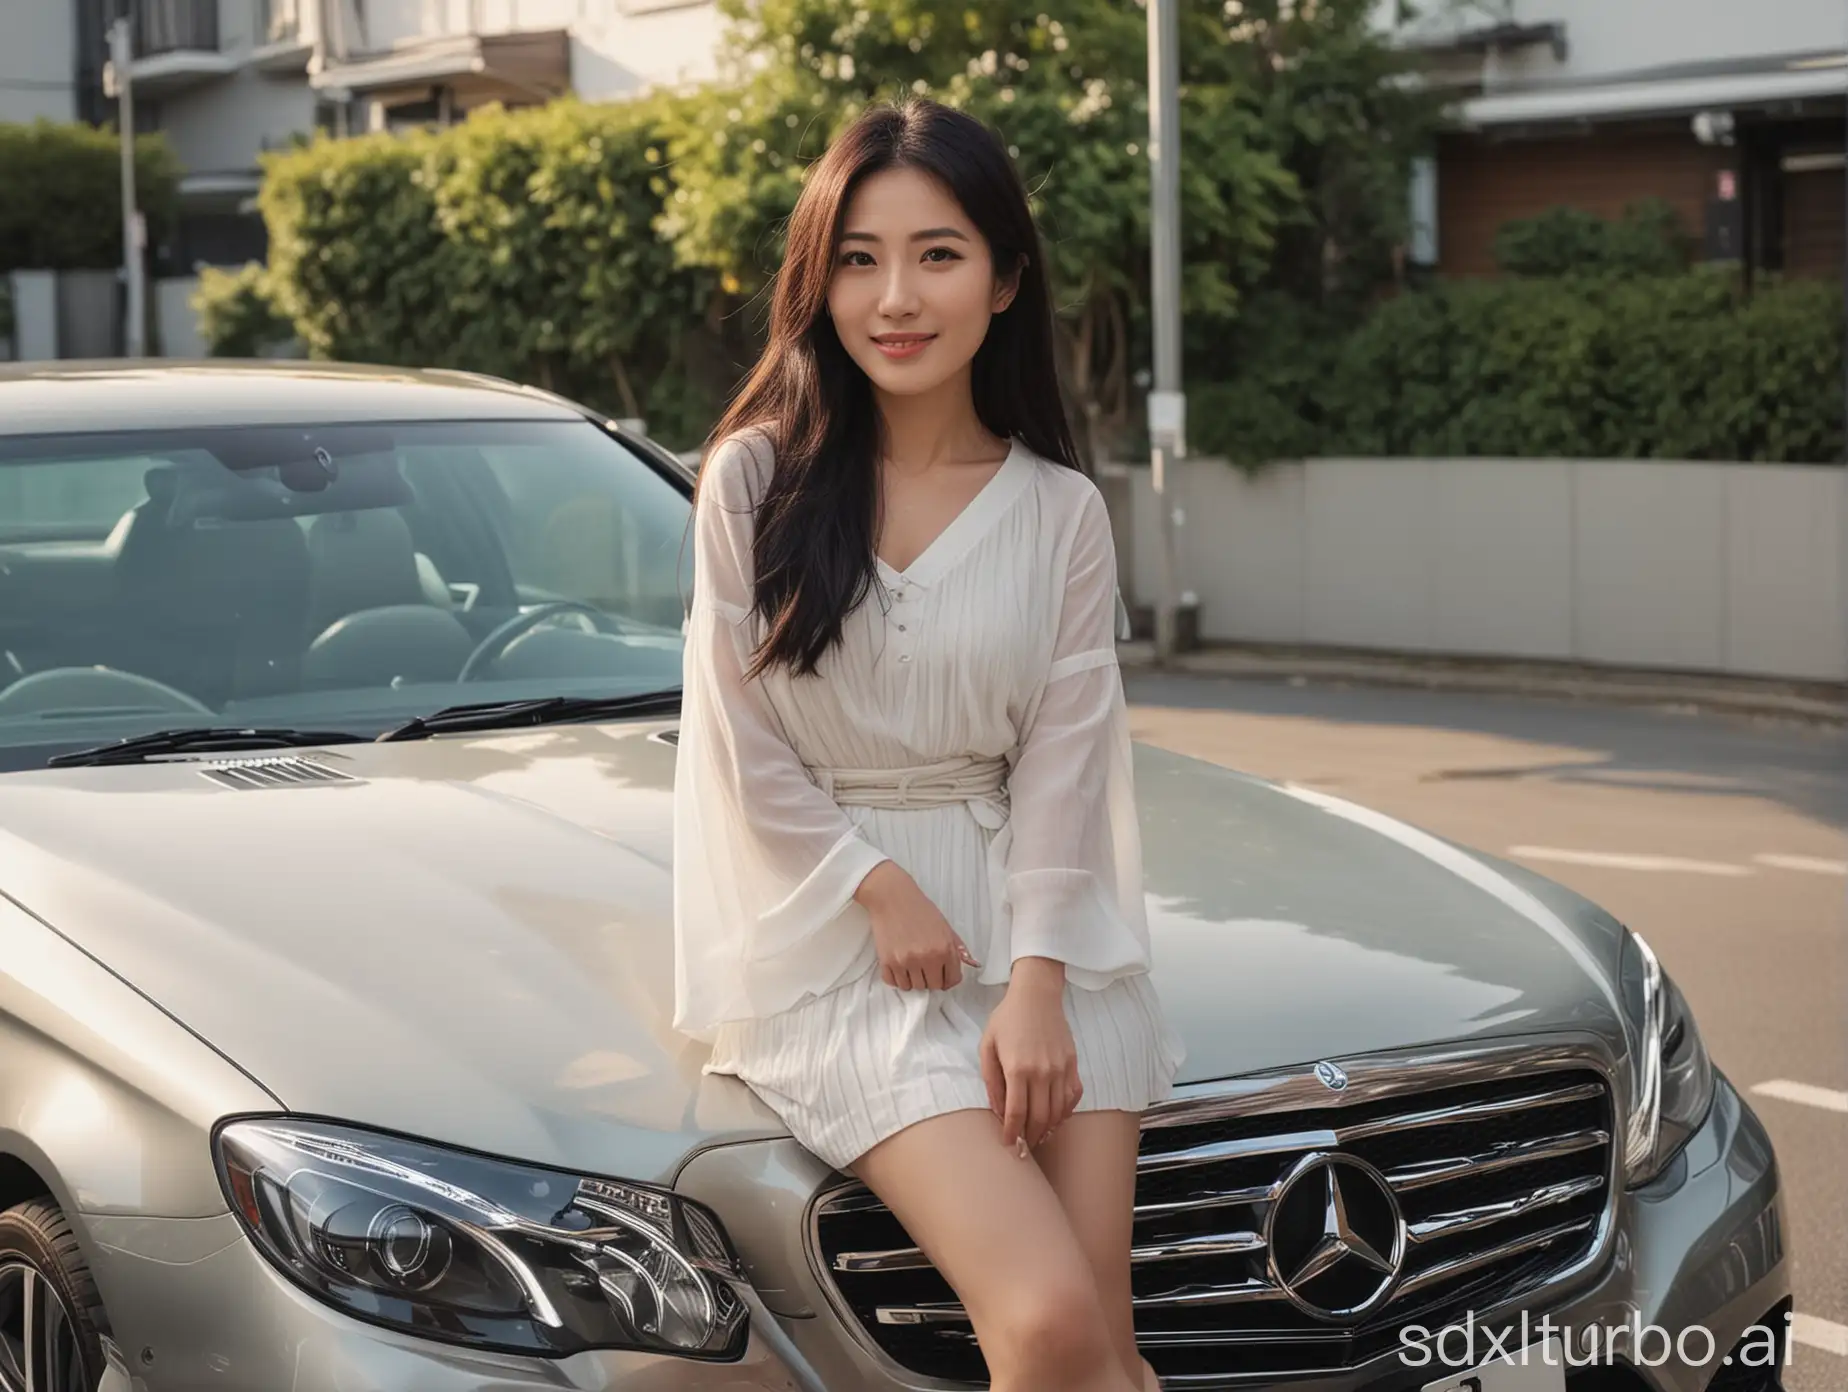 Stunning-Japanese-Instagram-Model-Poses-Gracefully-with-Benz-Car